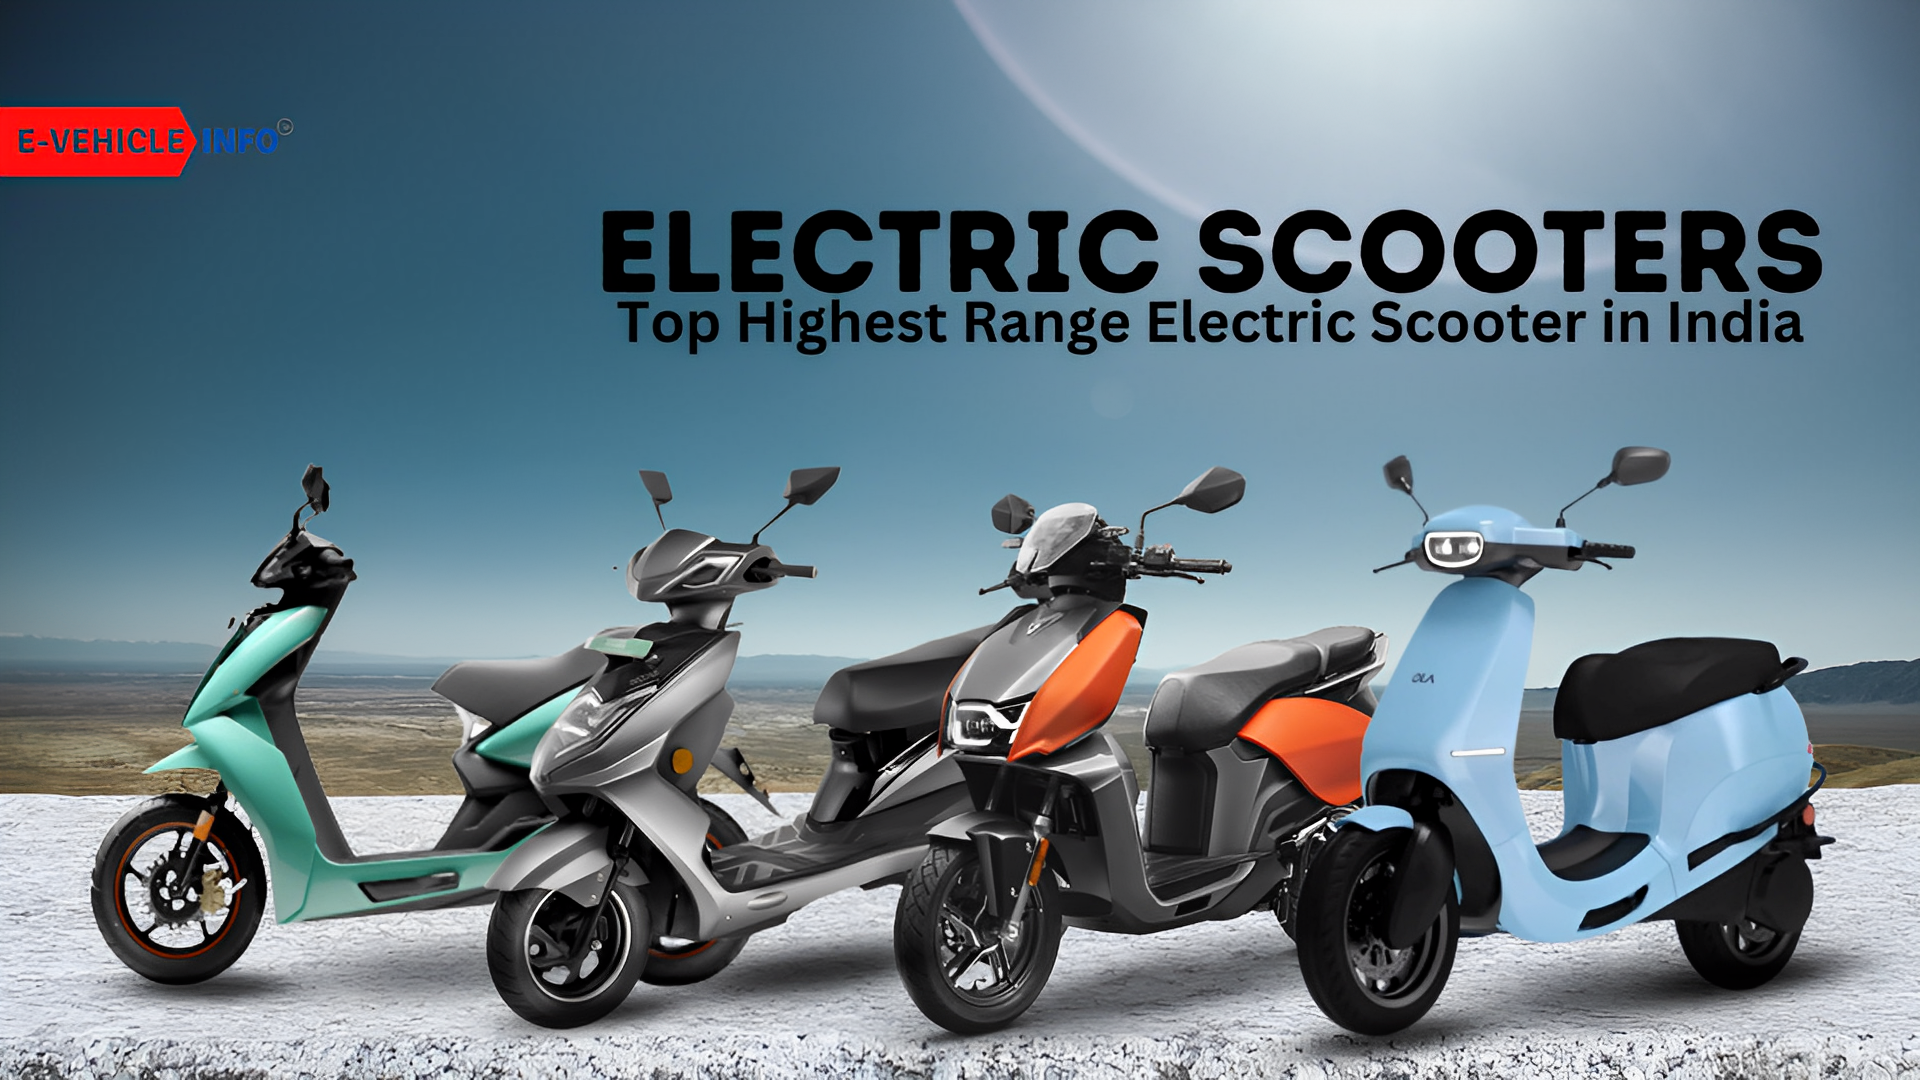 Top Longest Range Electric Scooters in India